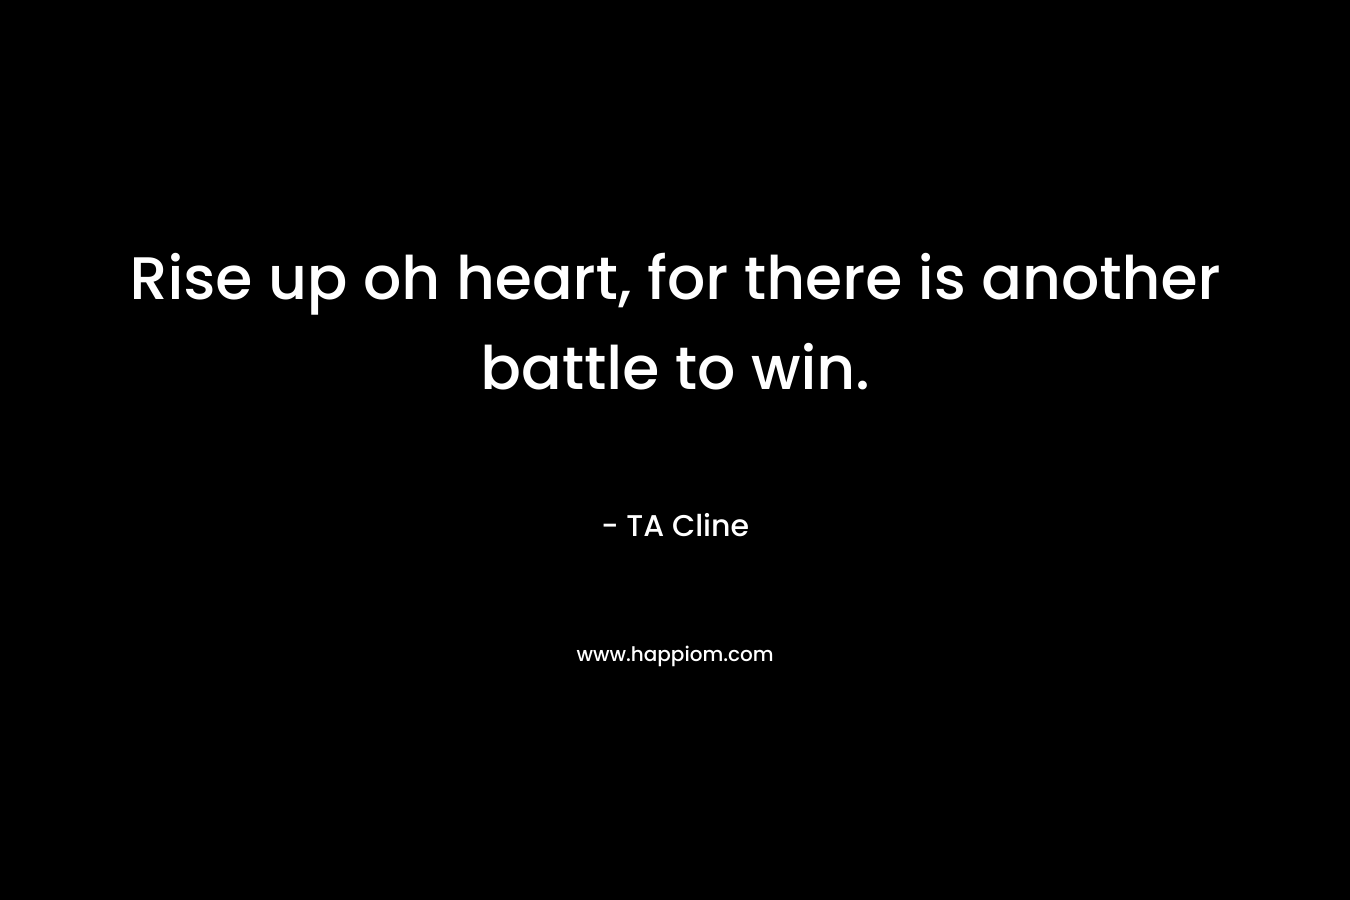 Rise up oh heart, for there is another battle to win. – TA Cline